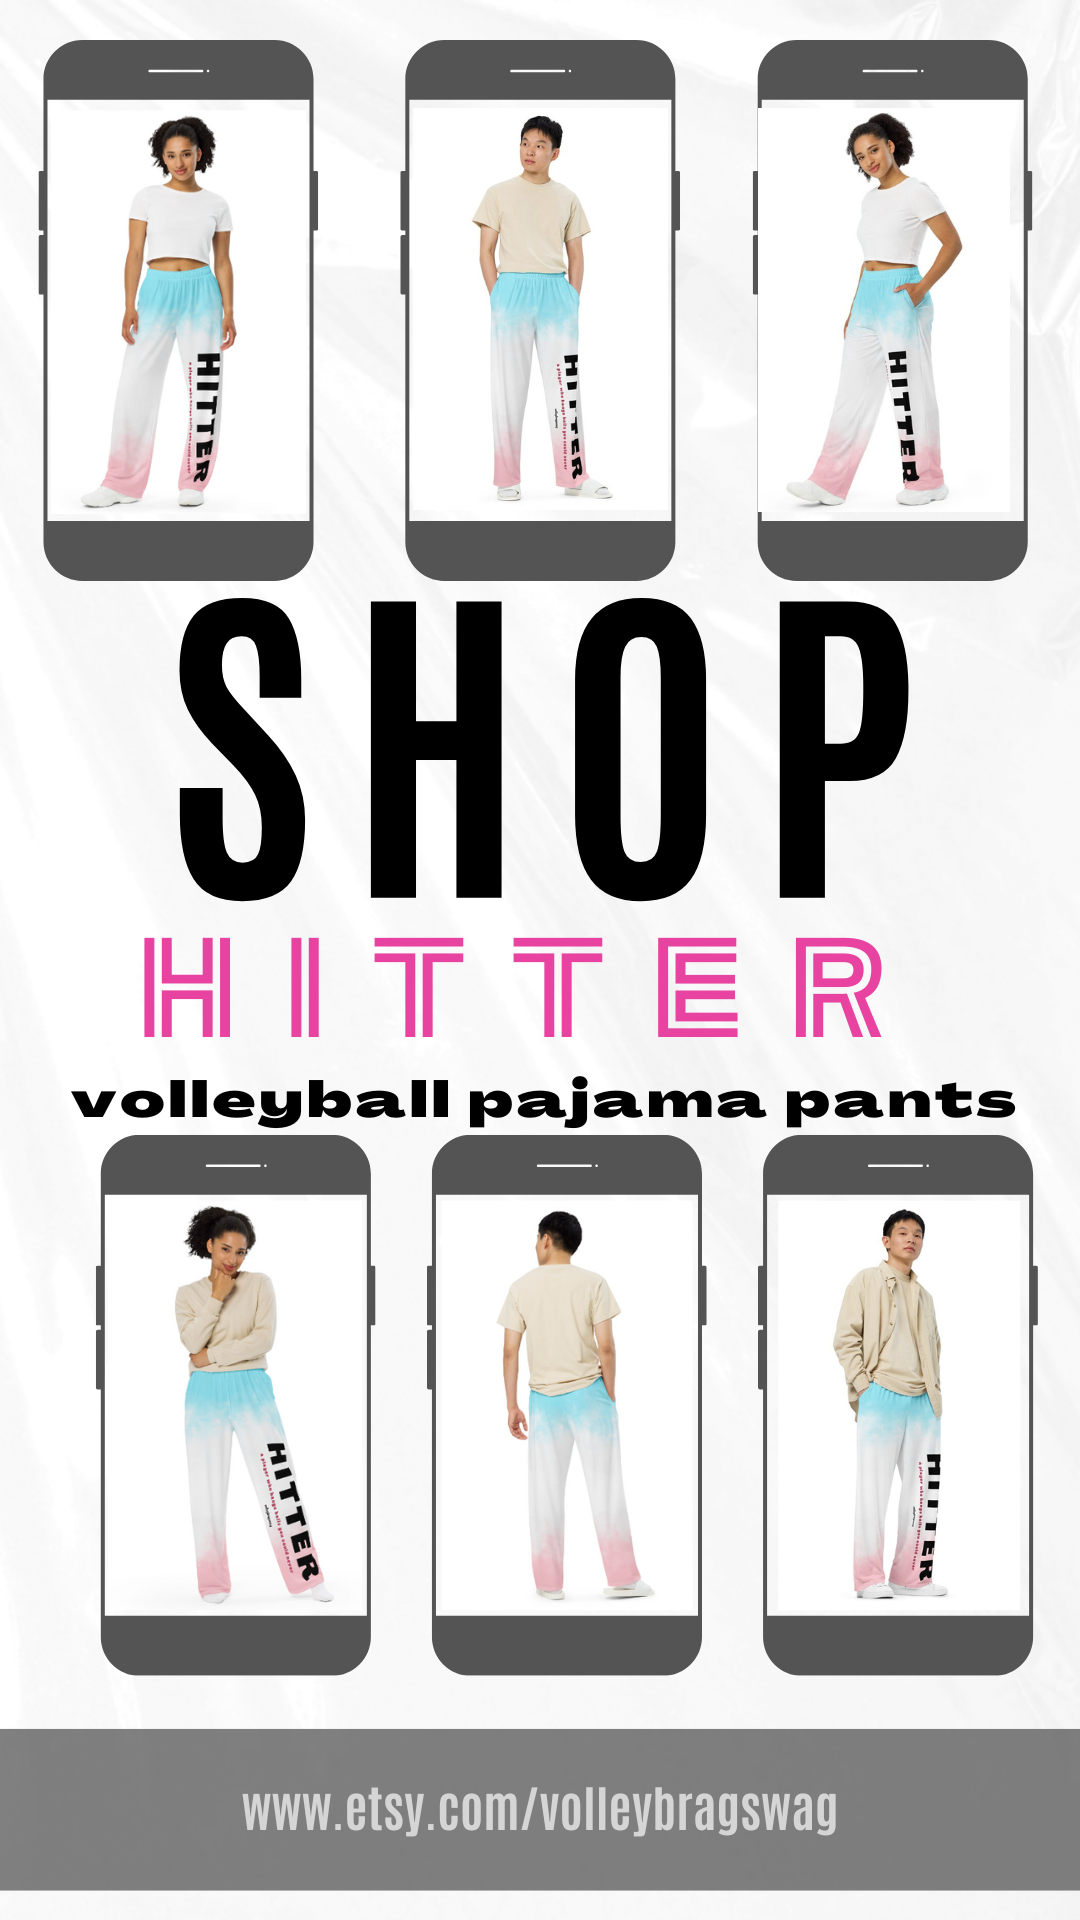 Now you know you want you some of these! Shop HITTER Volleyball pink white and blue tie dye wide leg pajama pants by Volleybragswag on ETSY! This you?

Collage-flyer-shop-pinkwhitebluetiedyehittervolleyballpajamapants